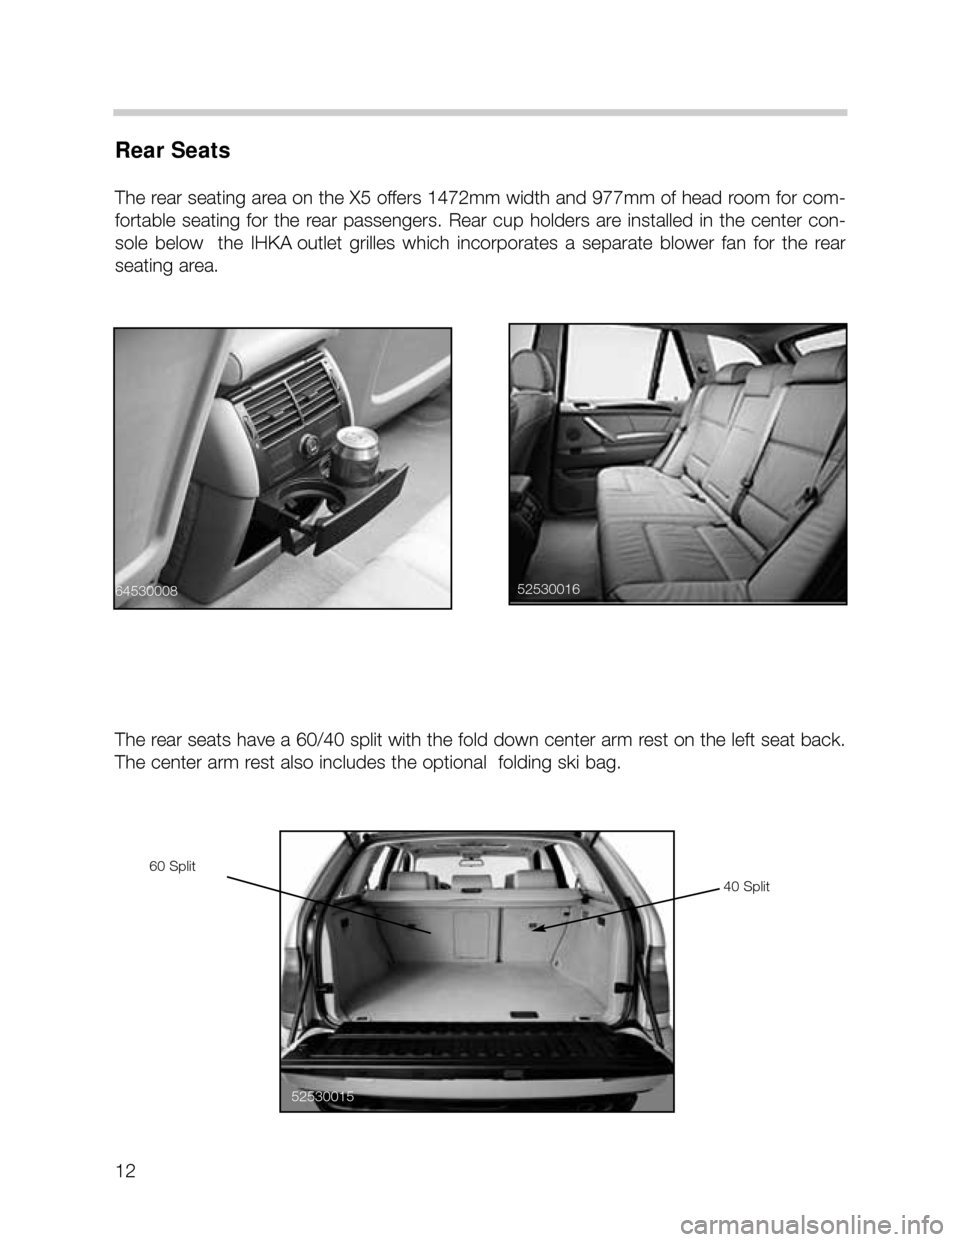 BMW X5 2000 E53 User Guide 12
Rear Seats
The rear seating area on the X5 offers 1472mm width and 977mm of head room for com-
fortable  seating  for  the  rear  passengers.  Rear  cup  holders  are  installed  in  the  center  c